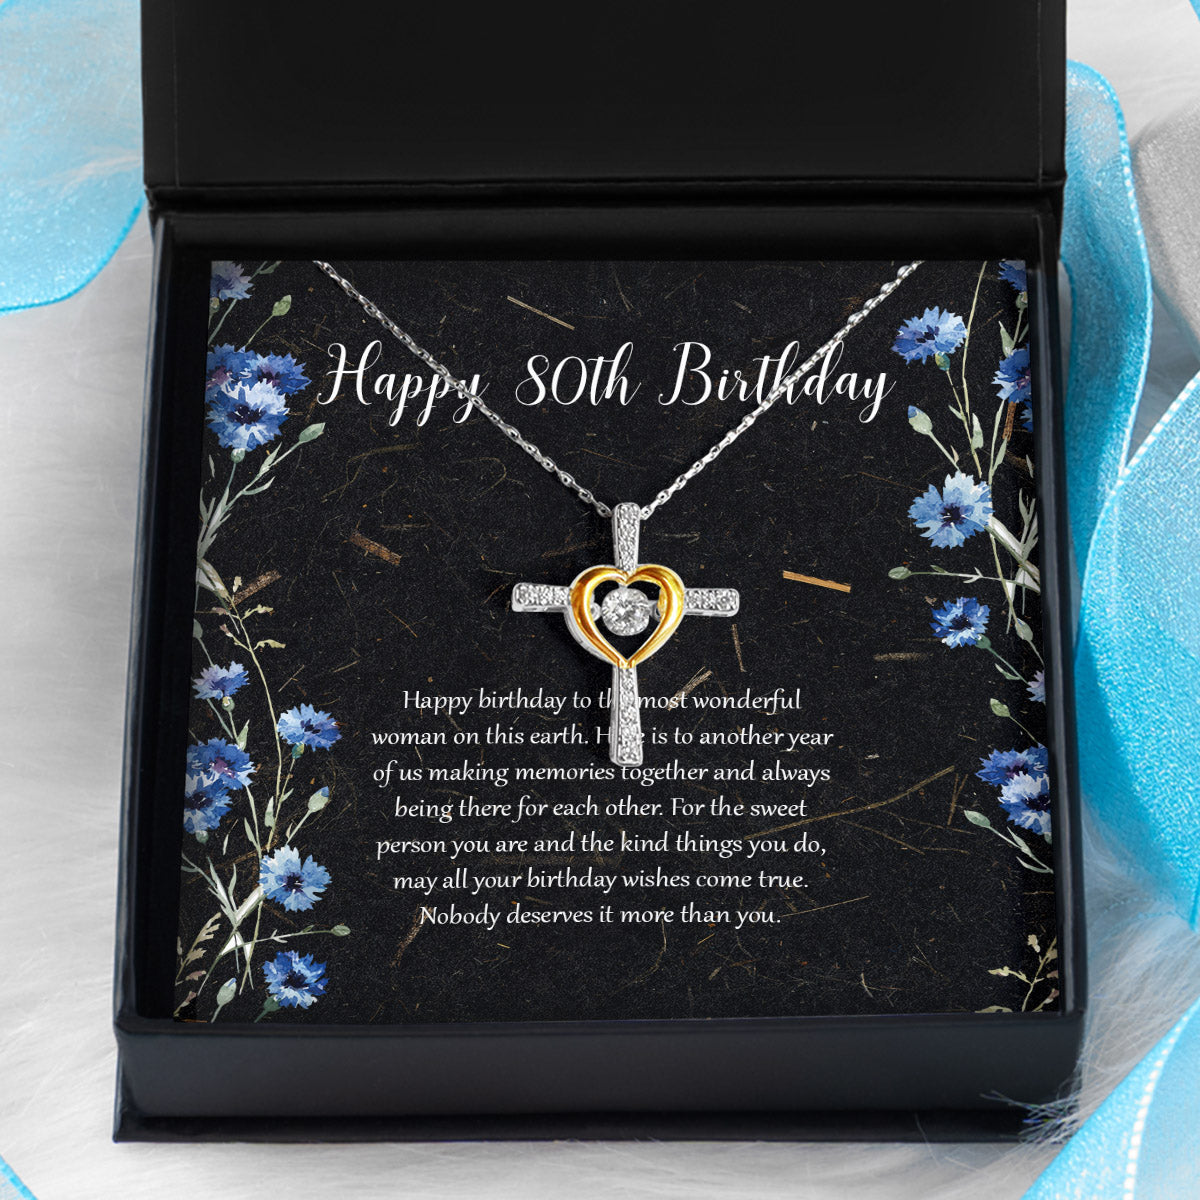 Cool Mom Gifts, I am an Insurance Sales Agent and a Mom.!, Fun Birthday  Cross Dancing Necklace Gifts For Mom From Daughter, Best mom gift ideas,  Best